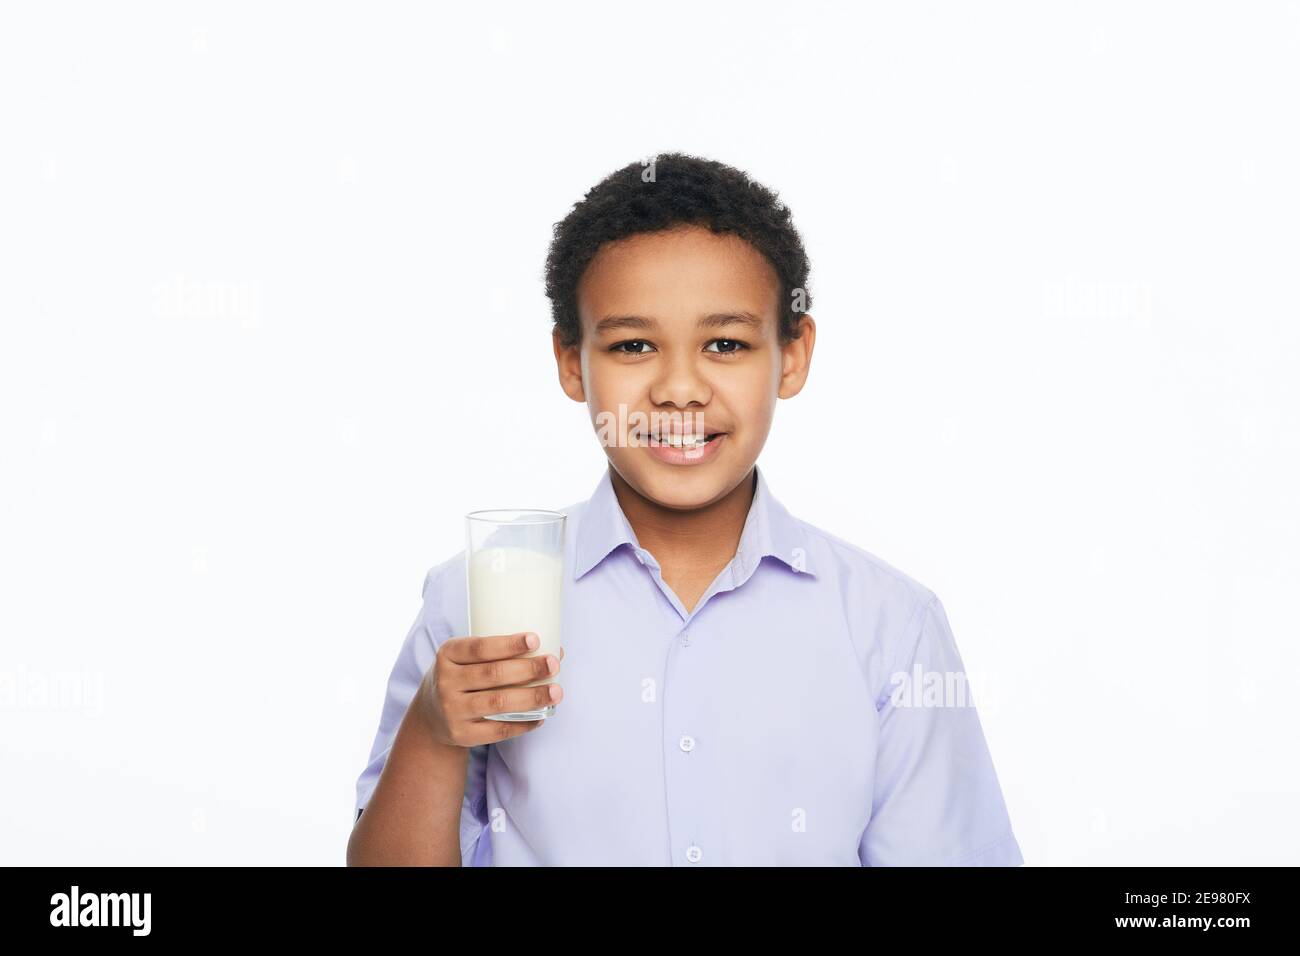 African American male kid holding a glass of milk with a toothy smile, isolated on white background. Benefits of milk for kids Stock Photo